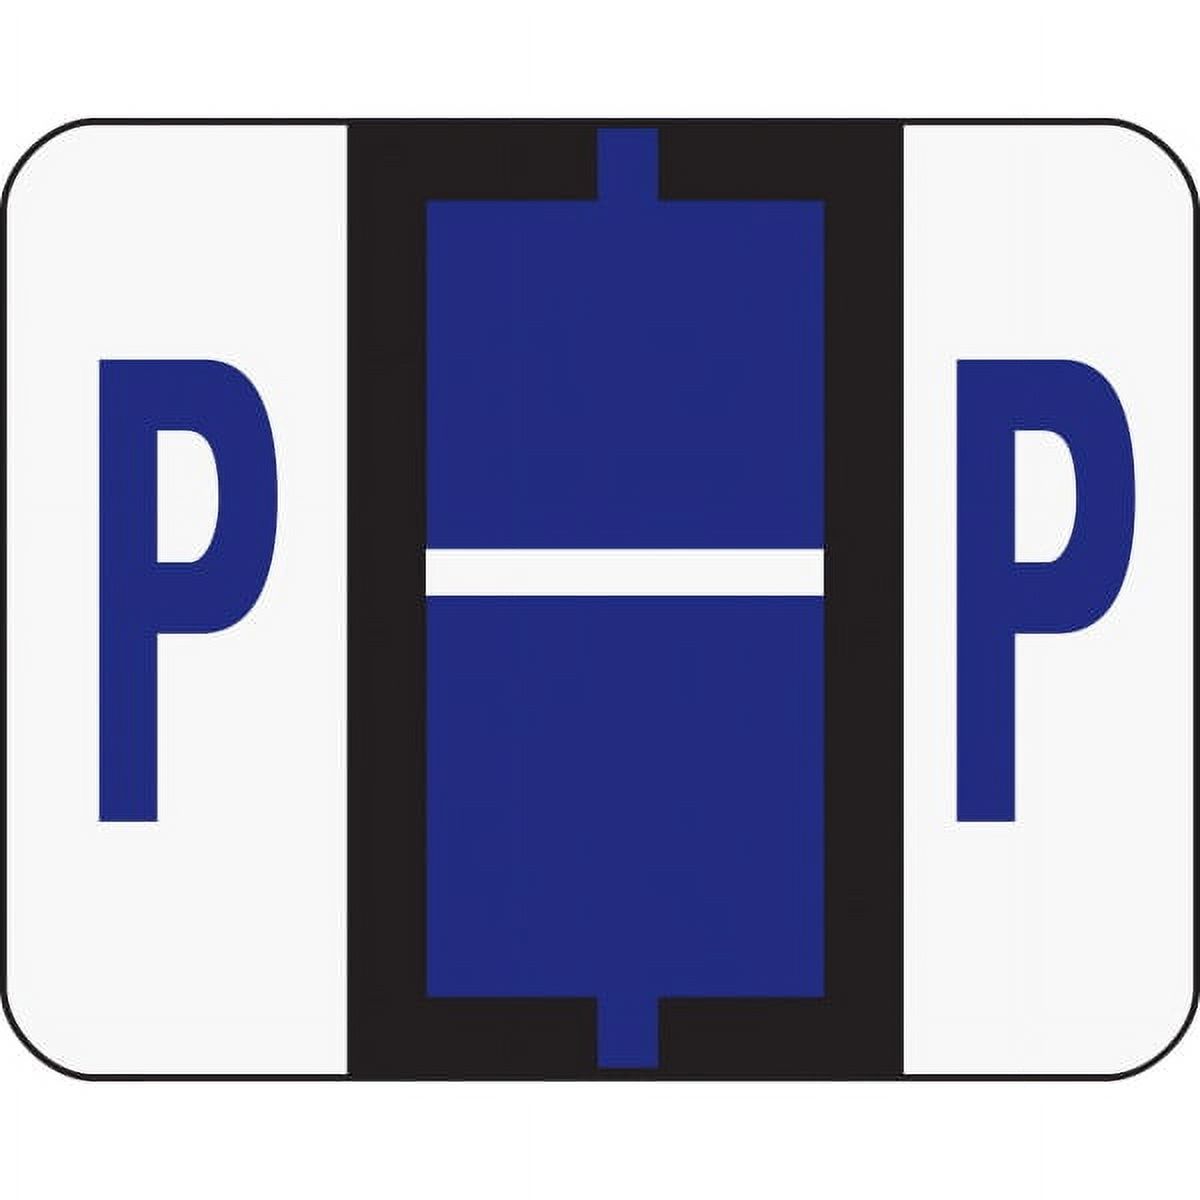 Smead 67086 A-Z Color-Coded Bar-Style End Tab Labels, Letter P, Violet, 500/Roll - image 3 of 3